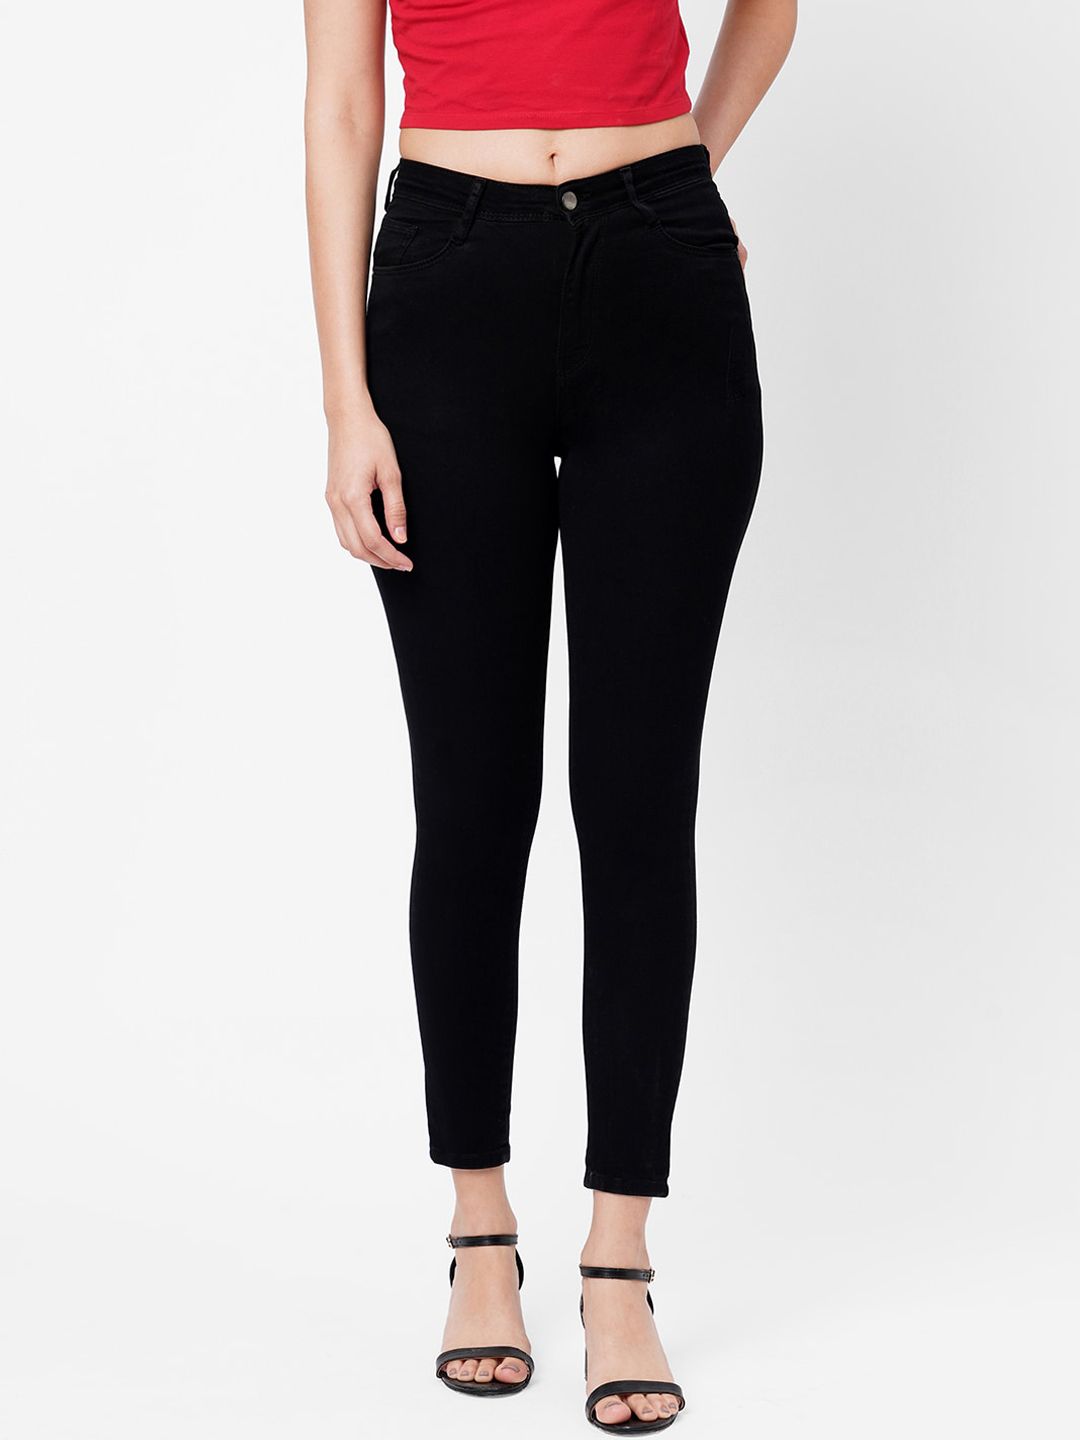 Kraus Jeans Women Black Super Skinny Fit High-Rise Cropped Jeans Price in India